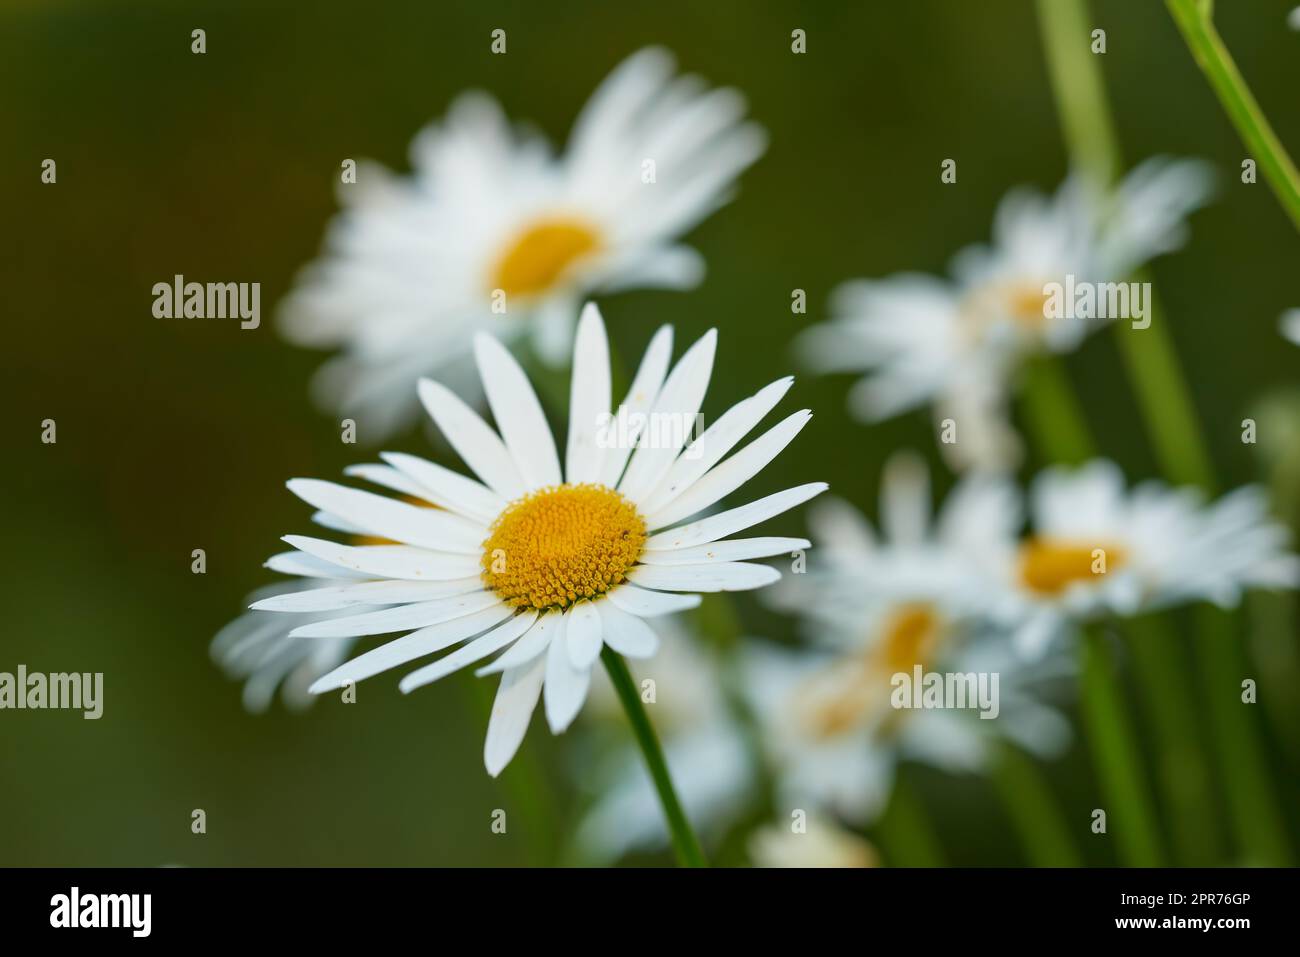 Daisy flower growing in a garden against a blurred background. Closeup of a marguerite perennial flowering plant on a grassy field in spring. White flowers blooming in a green backyard garden Stock Photo